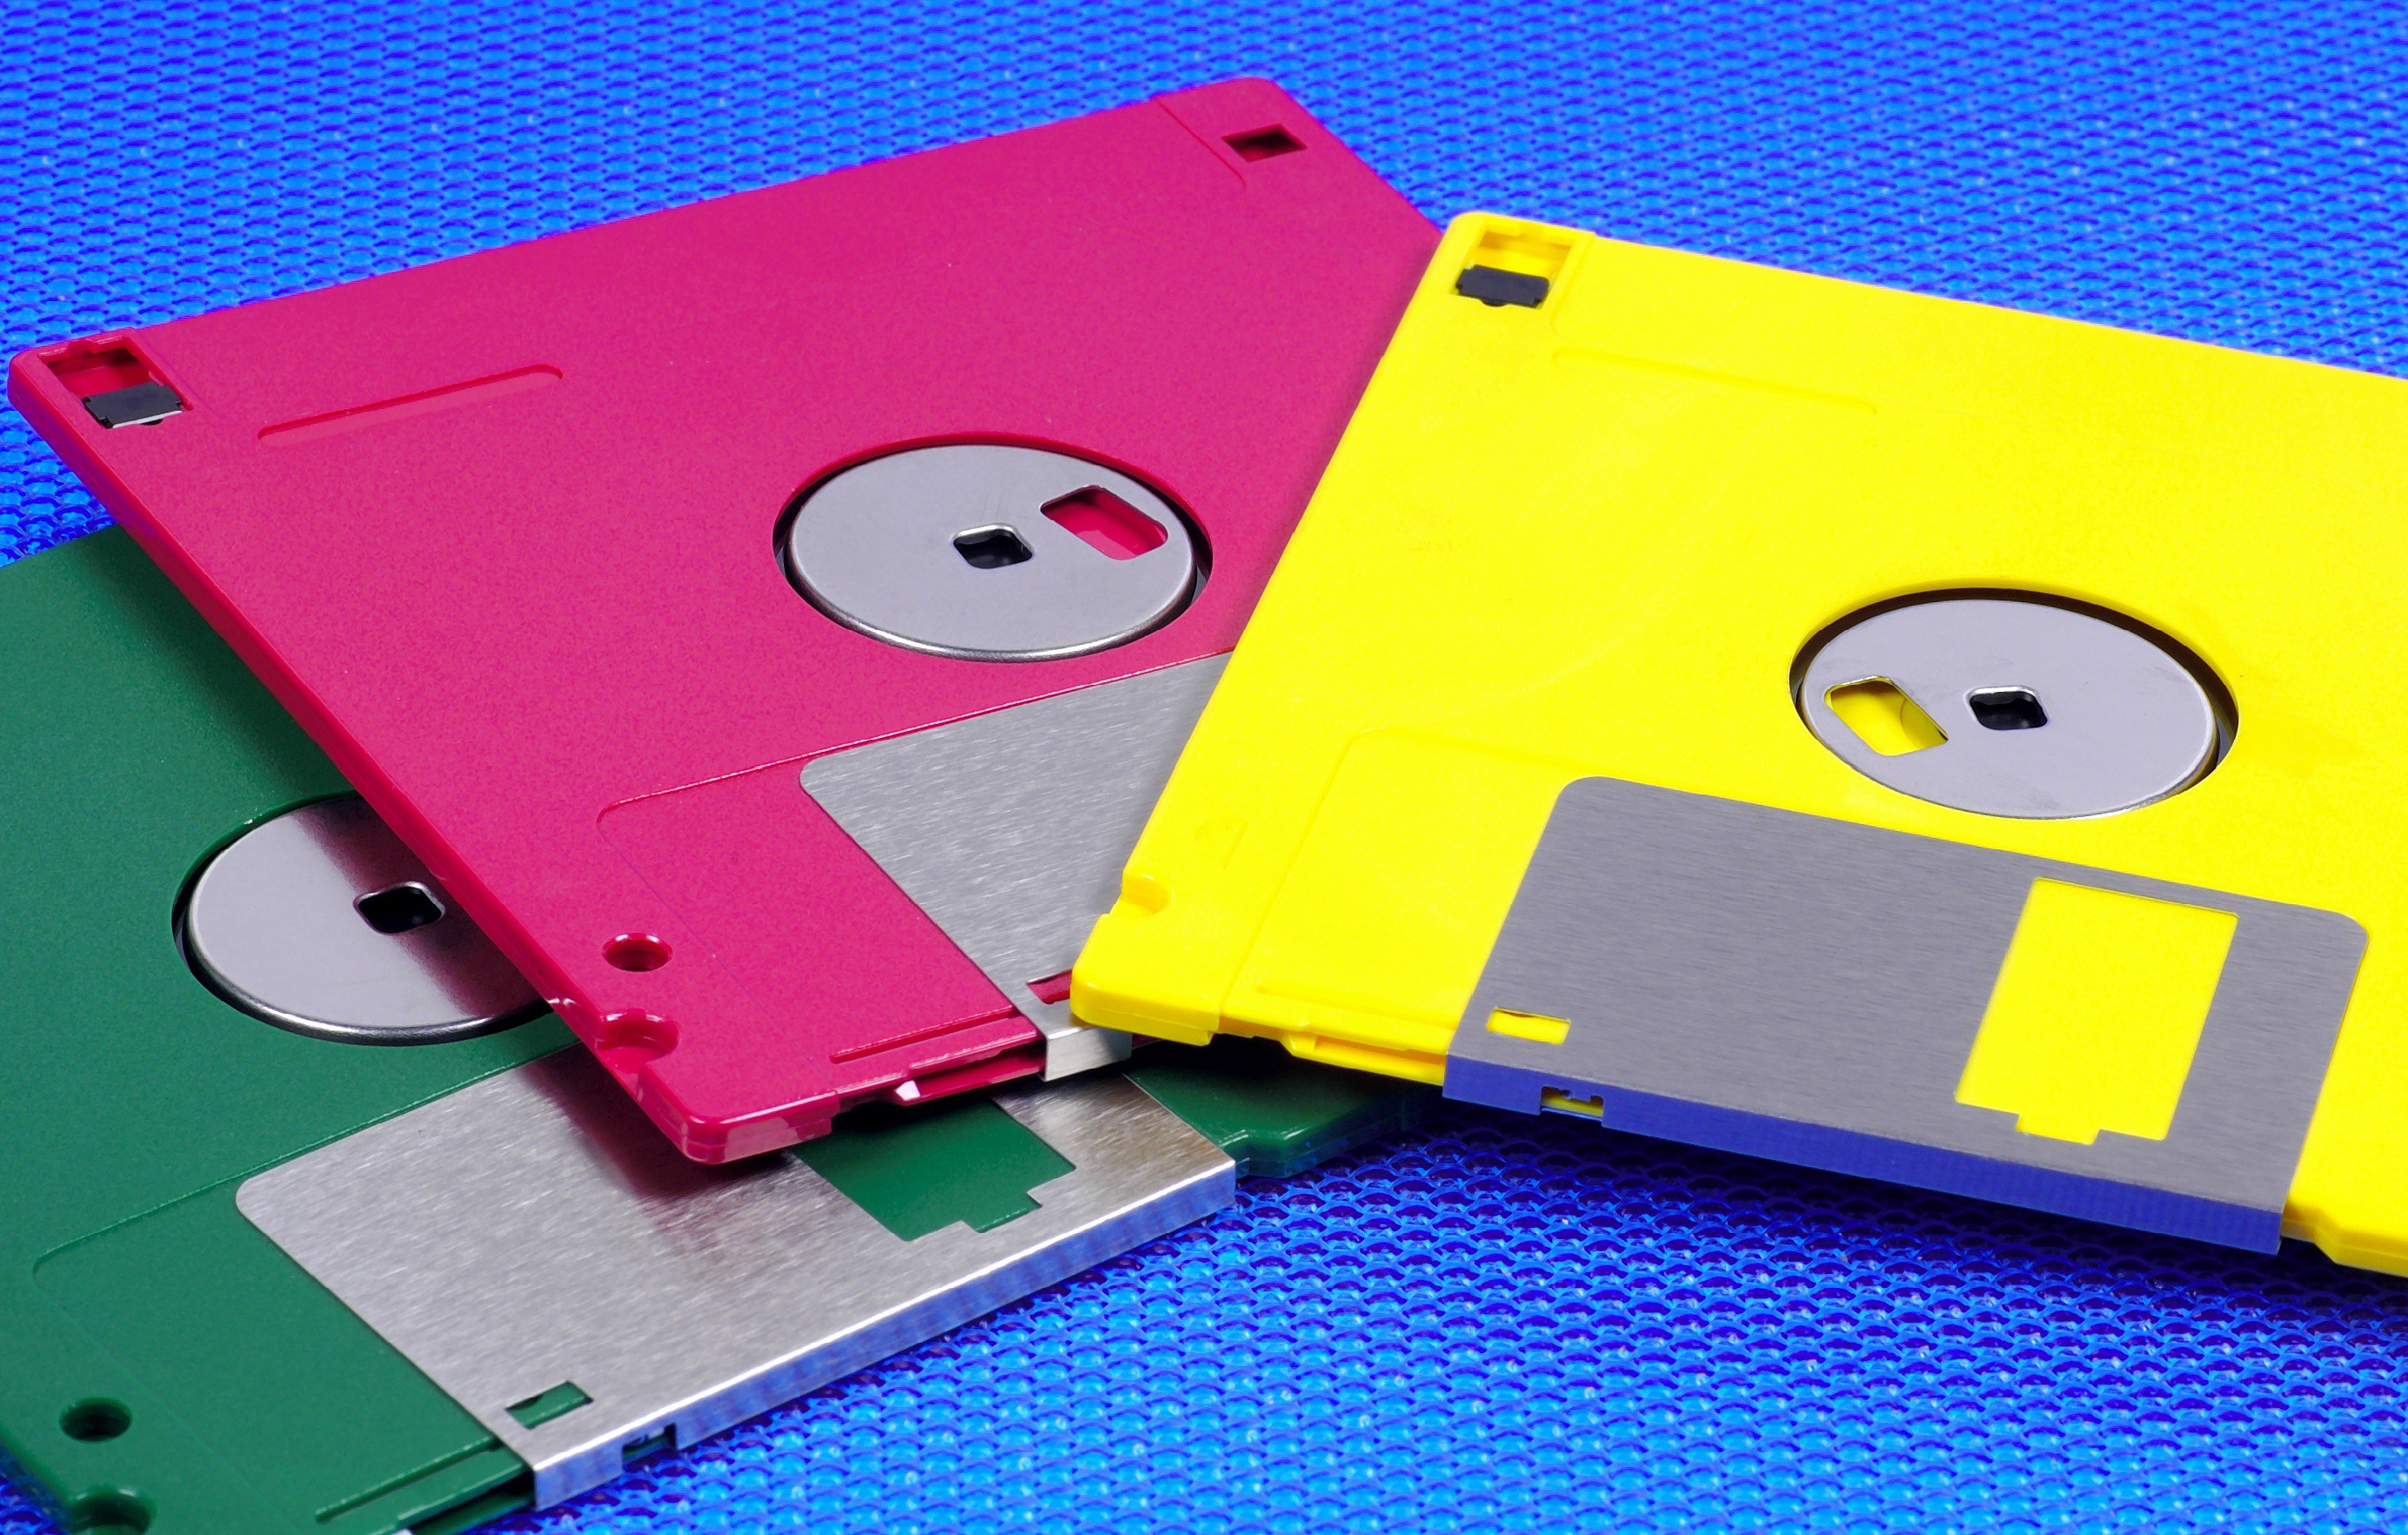 how to access floppy disk without formatting